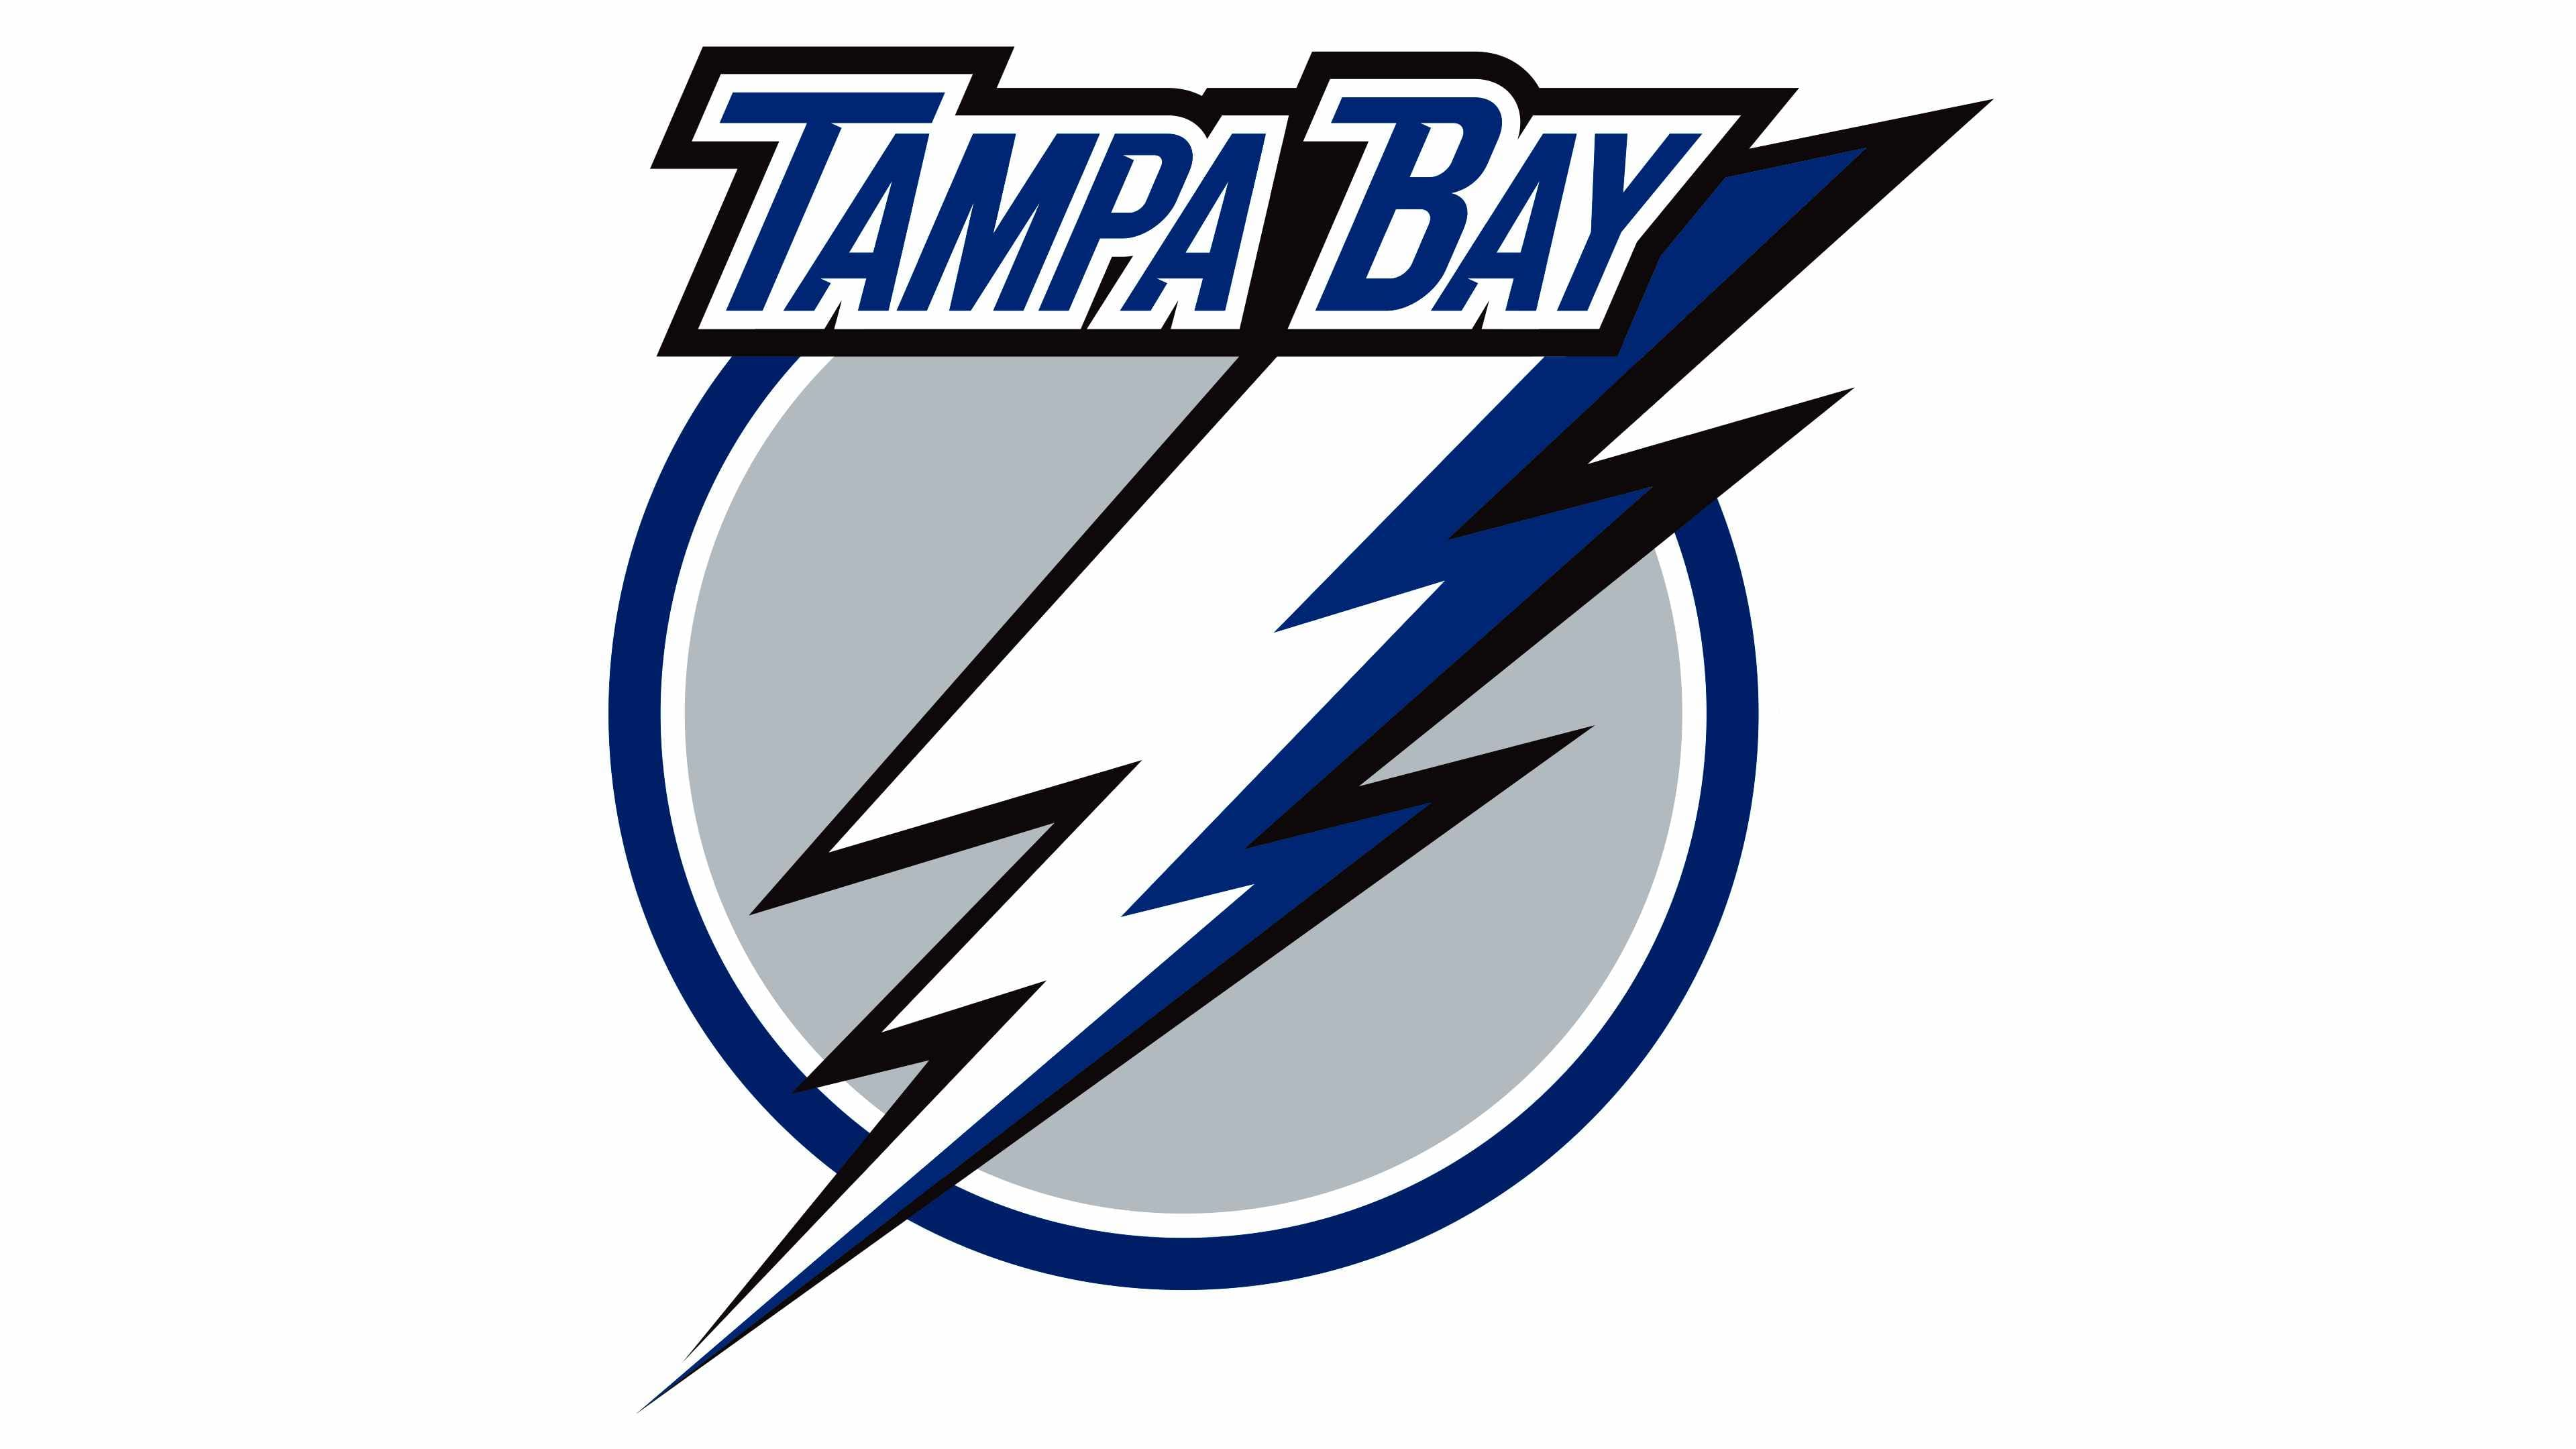 Tampa Bay Lightning logo with the option to charter a plane to the Bahamas.